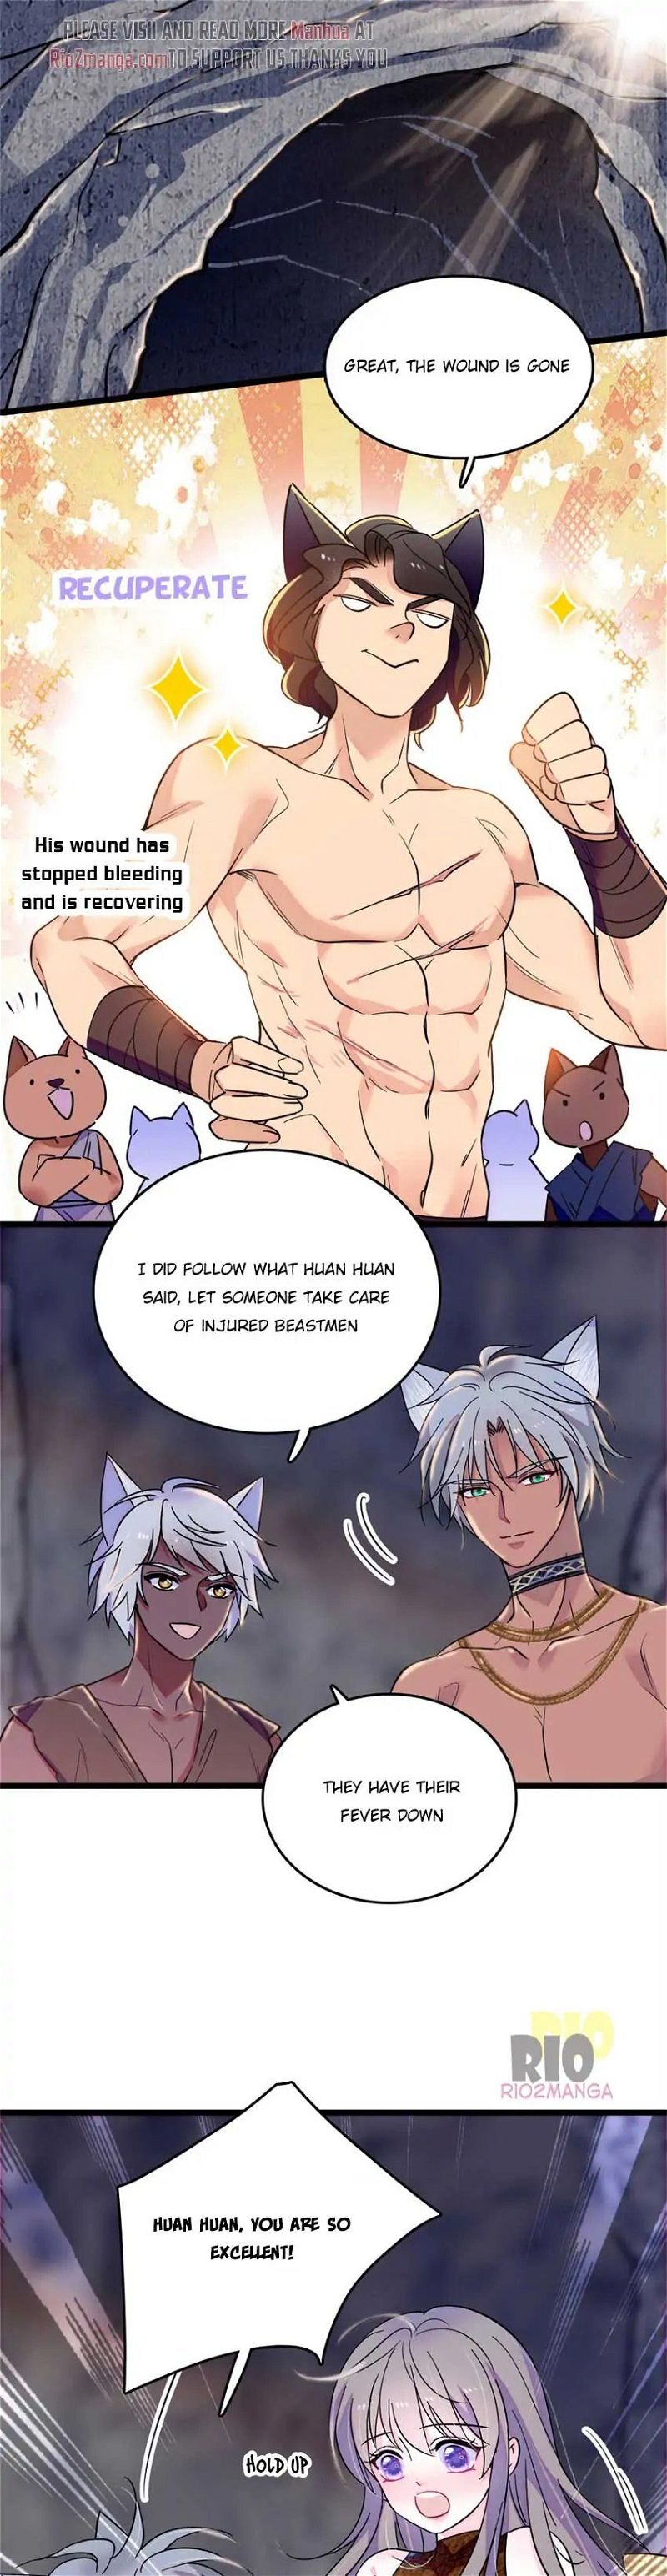 Romance in the Beast World Chapter 66 page 2